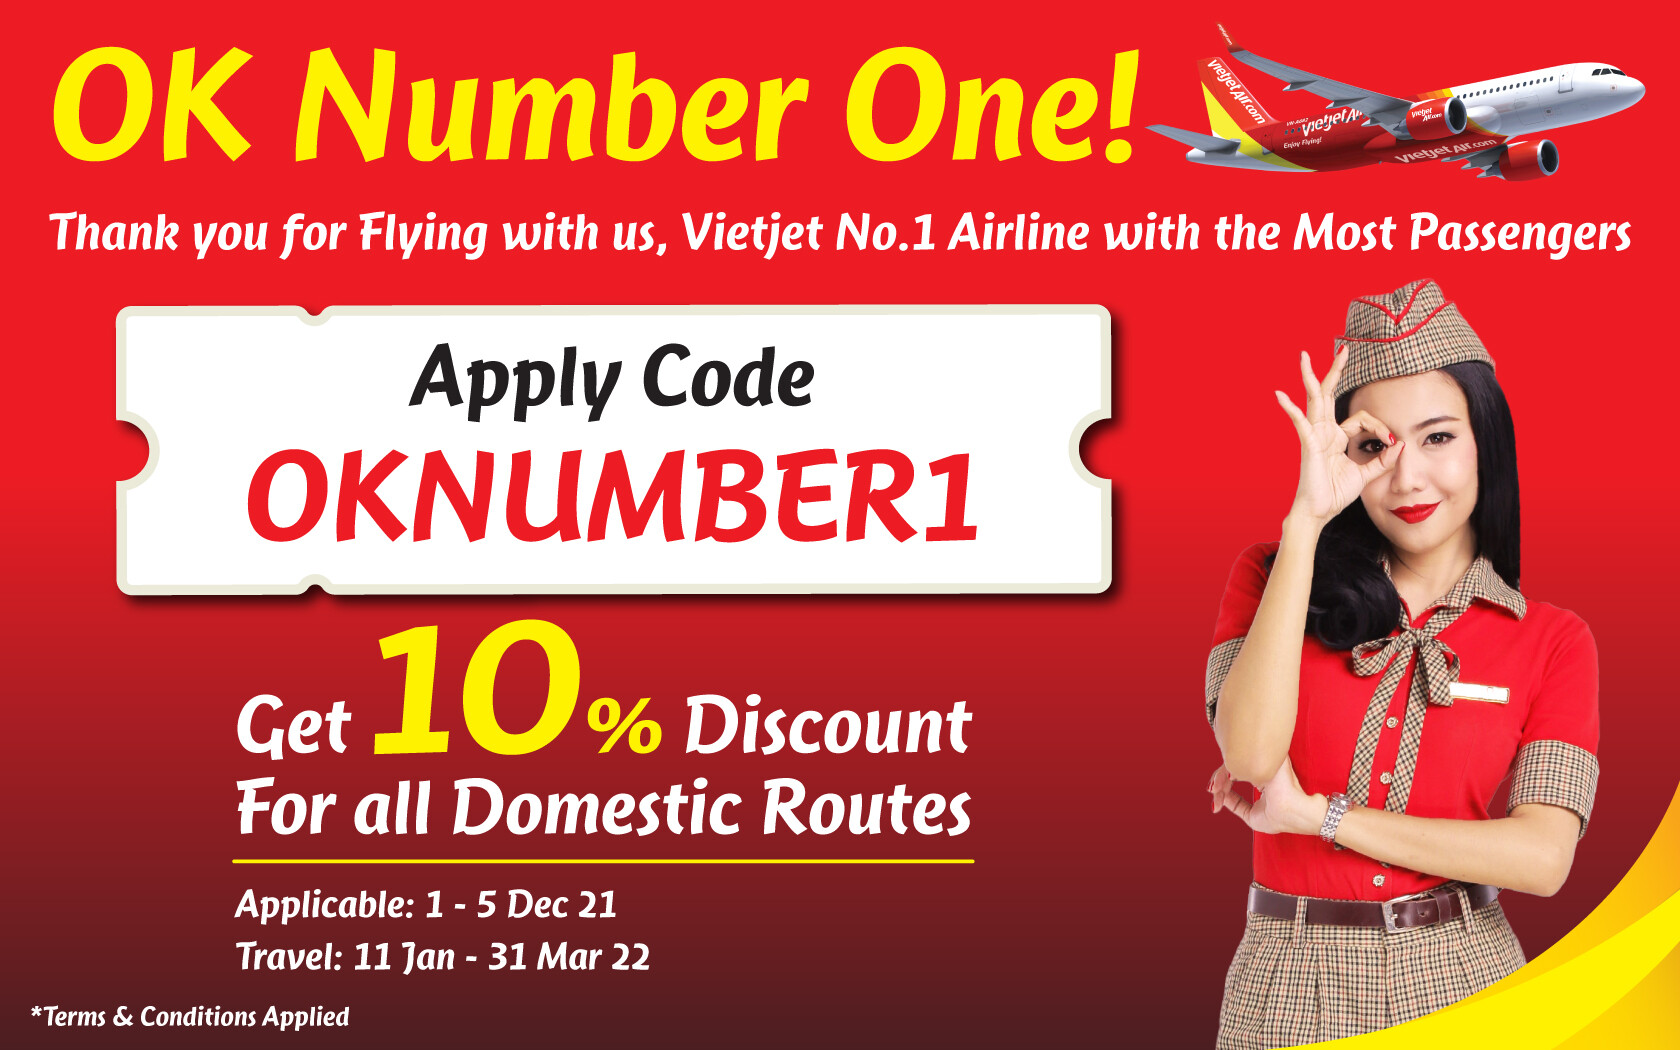 OK NUMBER 1! Thai Vietjet offers 10% Discount Codes plus 1,000 Funcoins for new Members